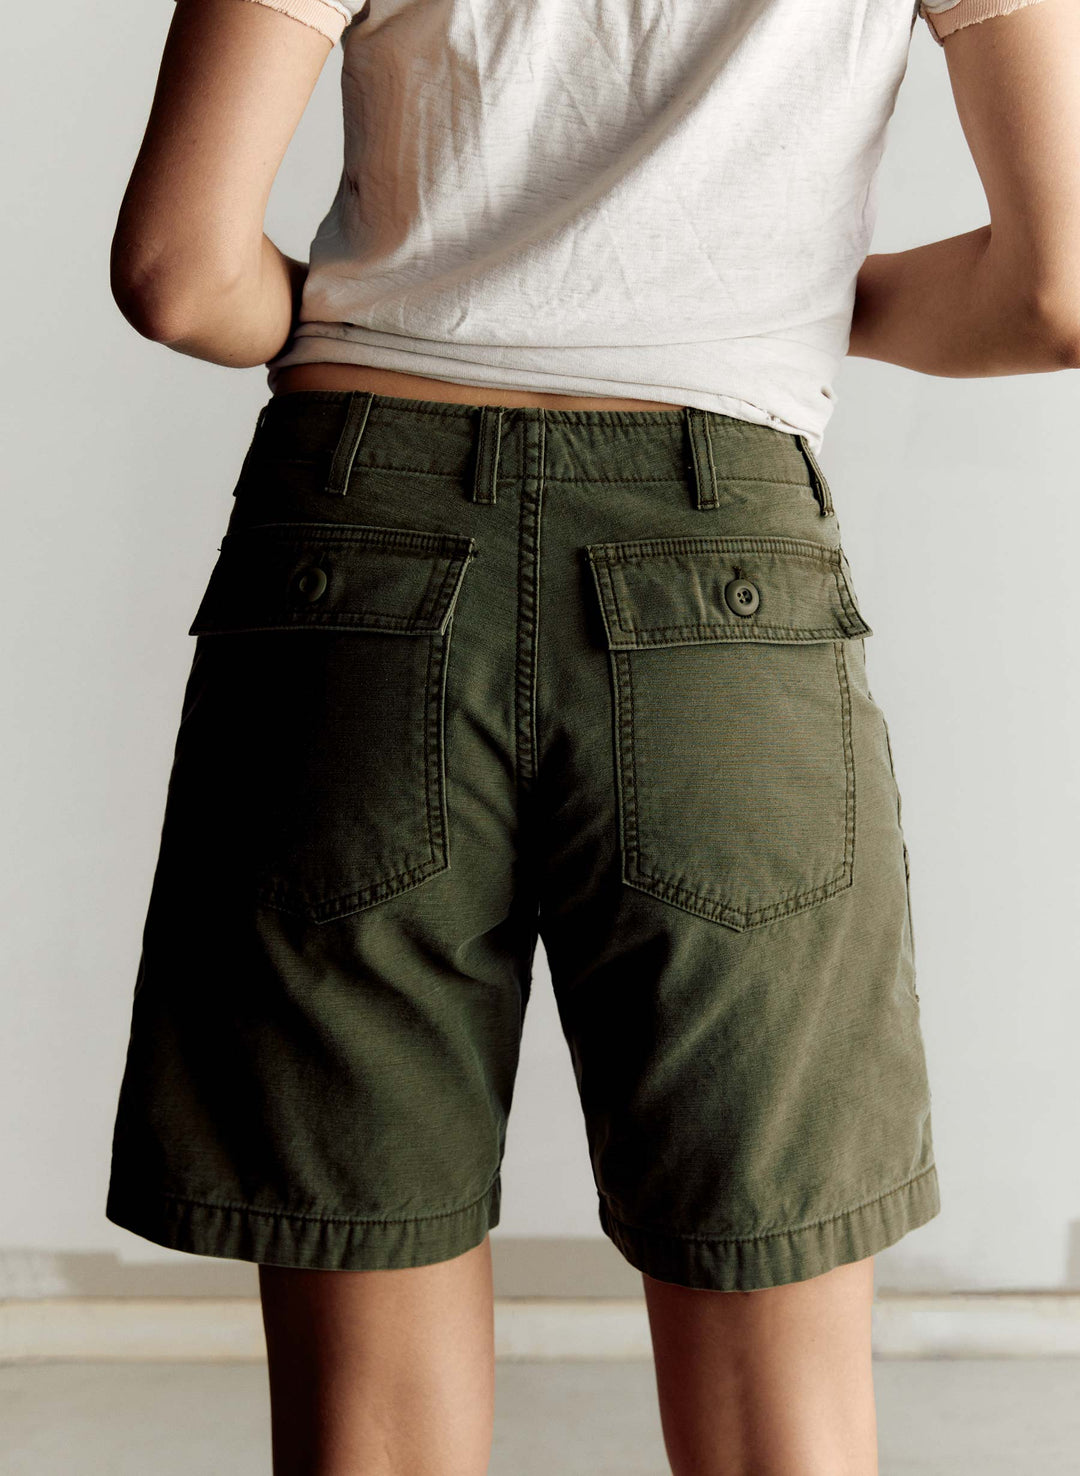 a person wearing green shorts